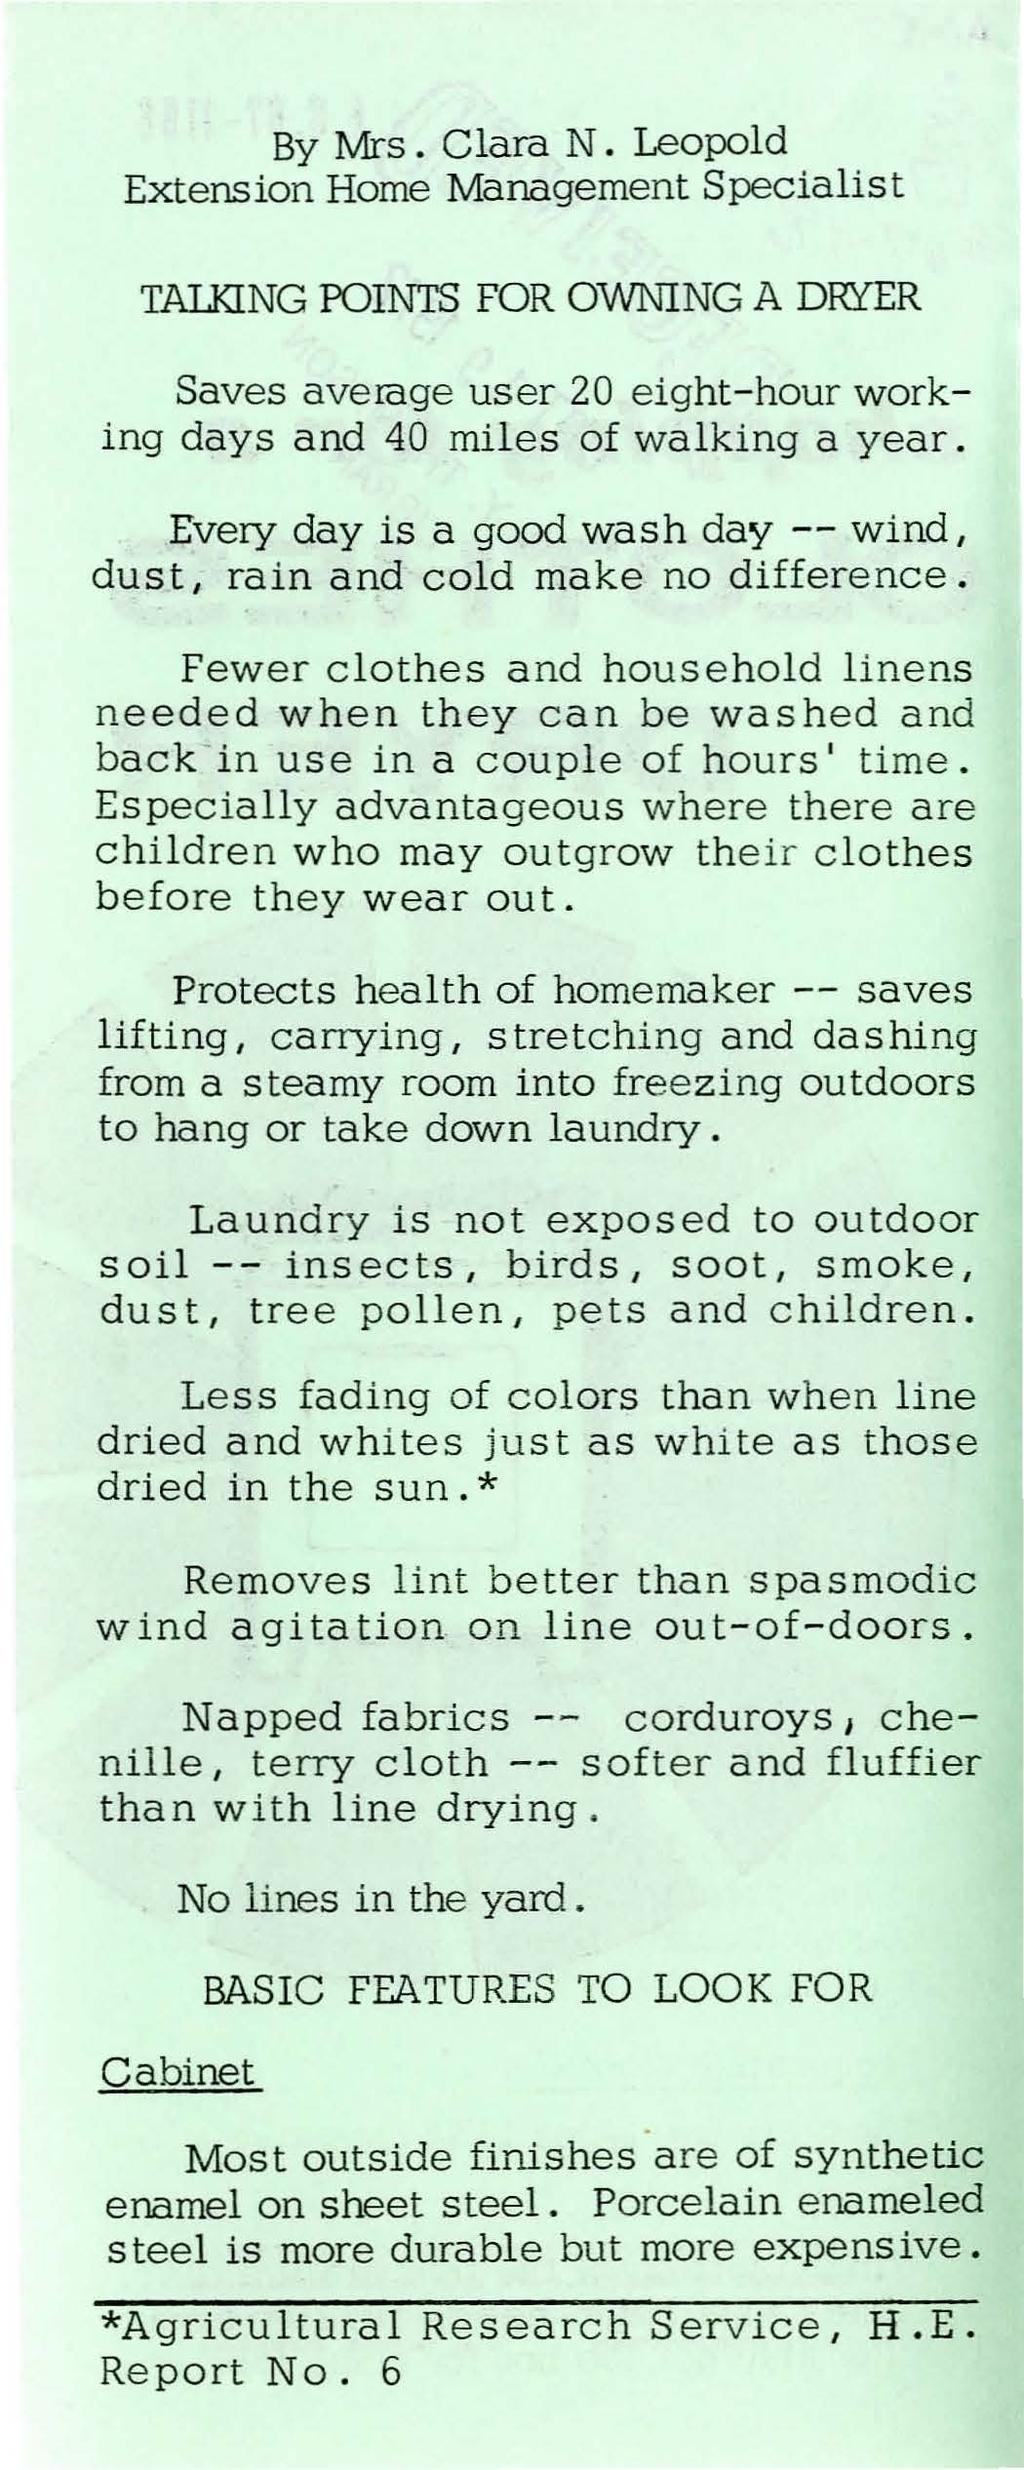 By Mrs. Clara N. Leopold Extension Home Management Specialist TALKING POINTS FOR OWNING A DRYER Saves average user 20 eight-hour working days and 40 miles of walking a year.